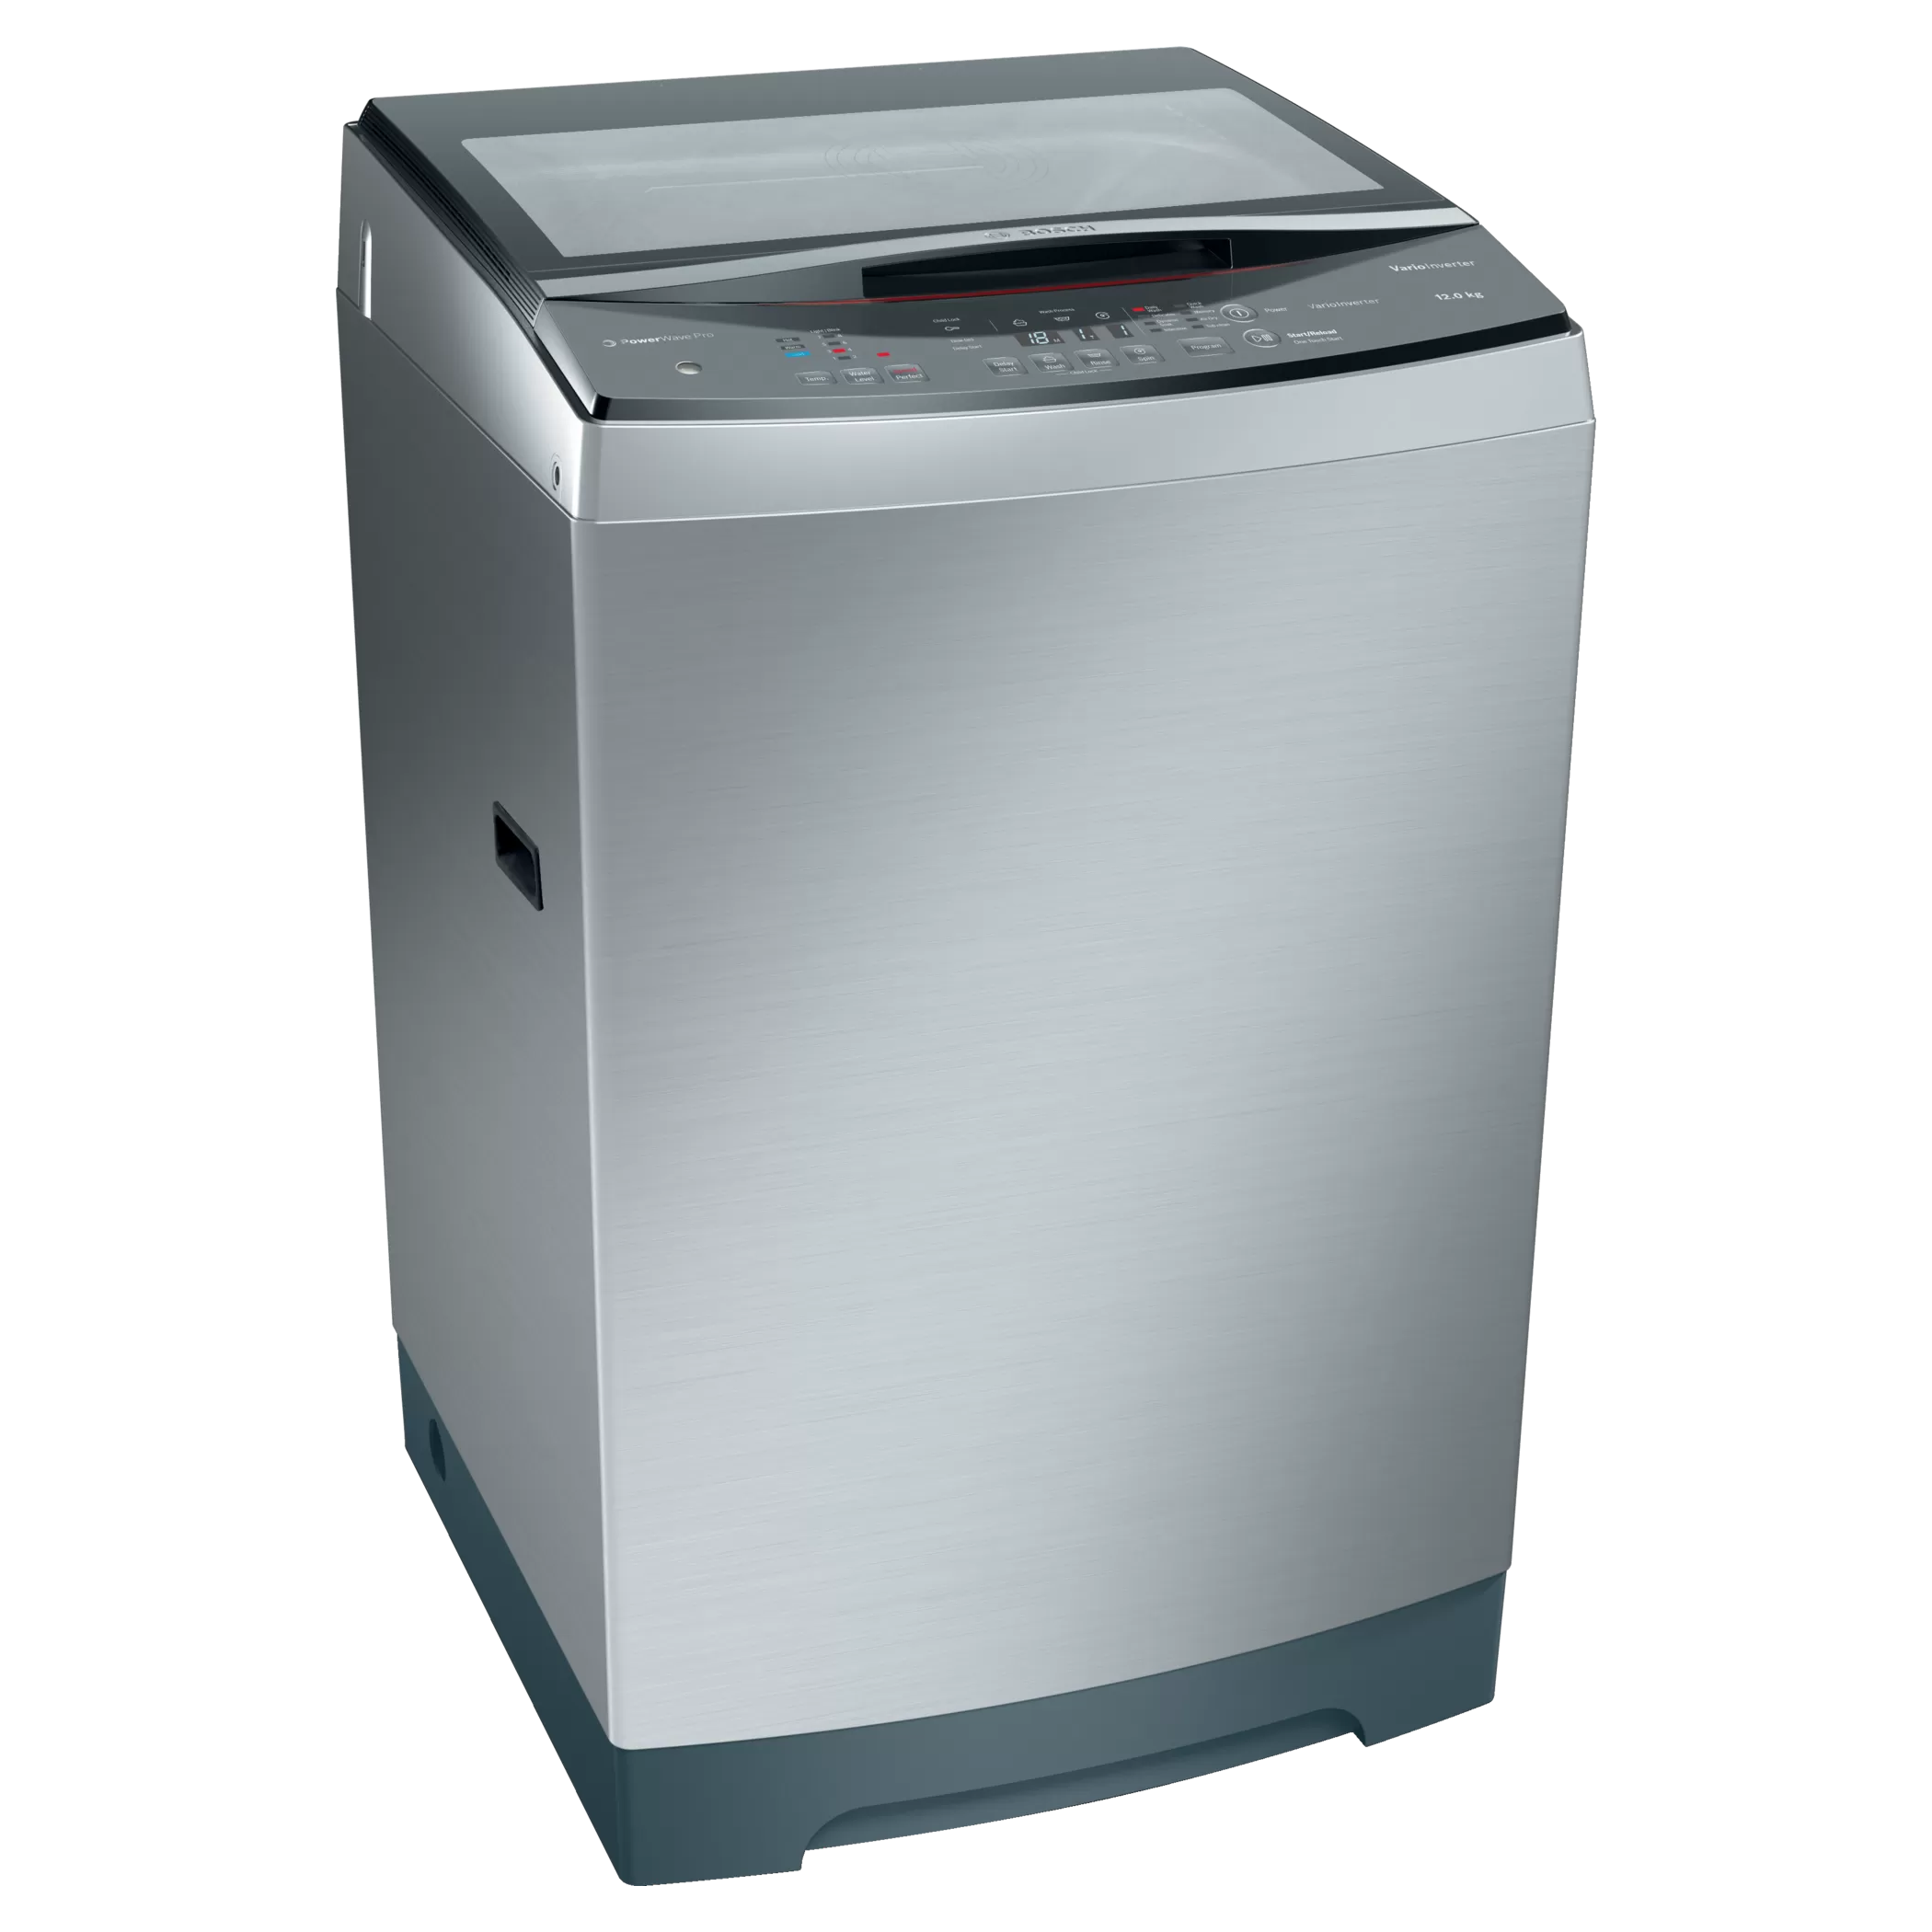 Bosch Serie 4 12 kg Fully Automatic Top Load Washing Machine (WOA126X1IN, Silver Inox)_1